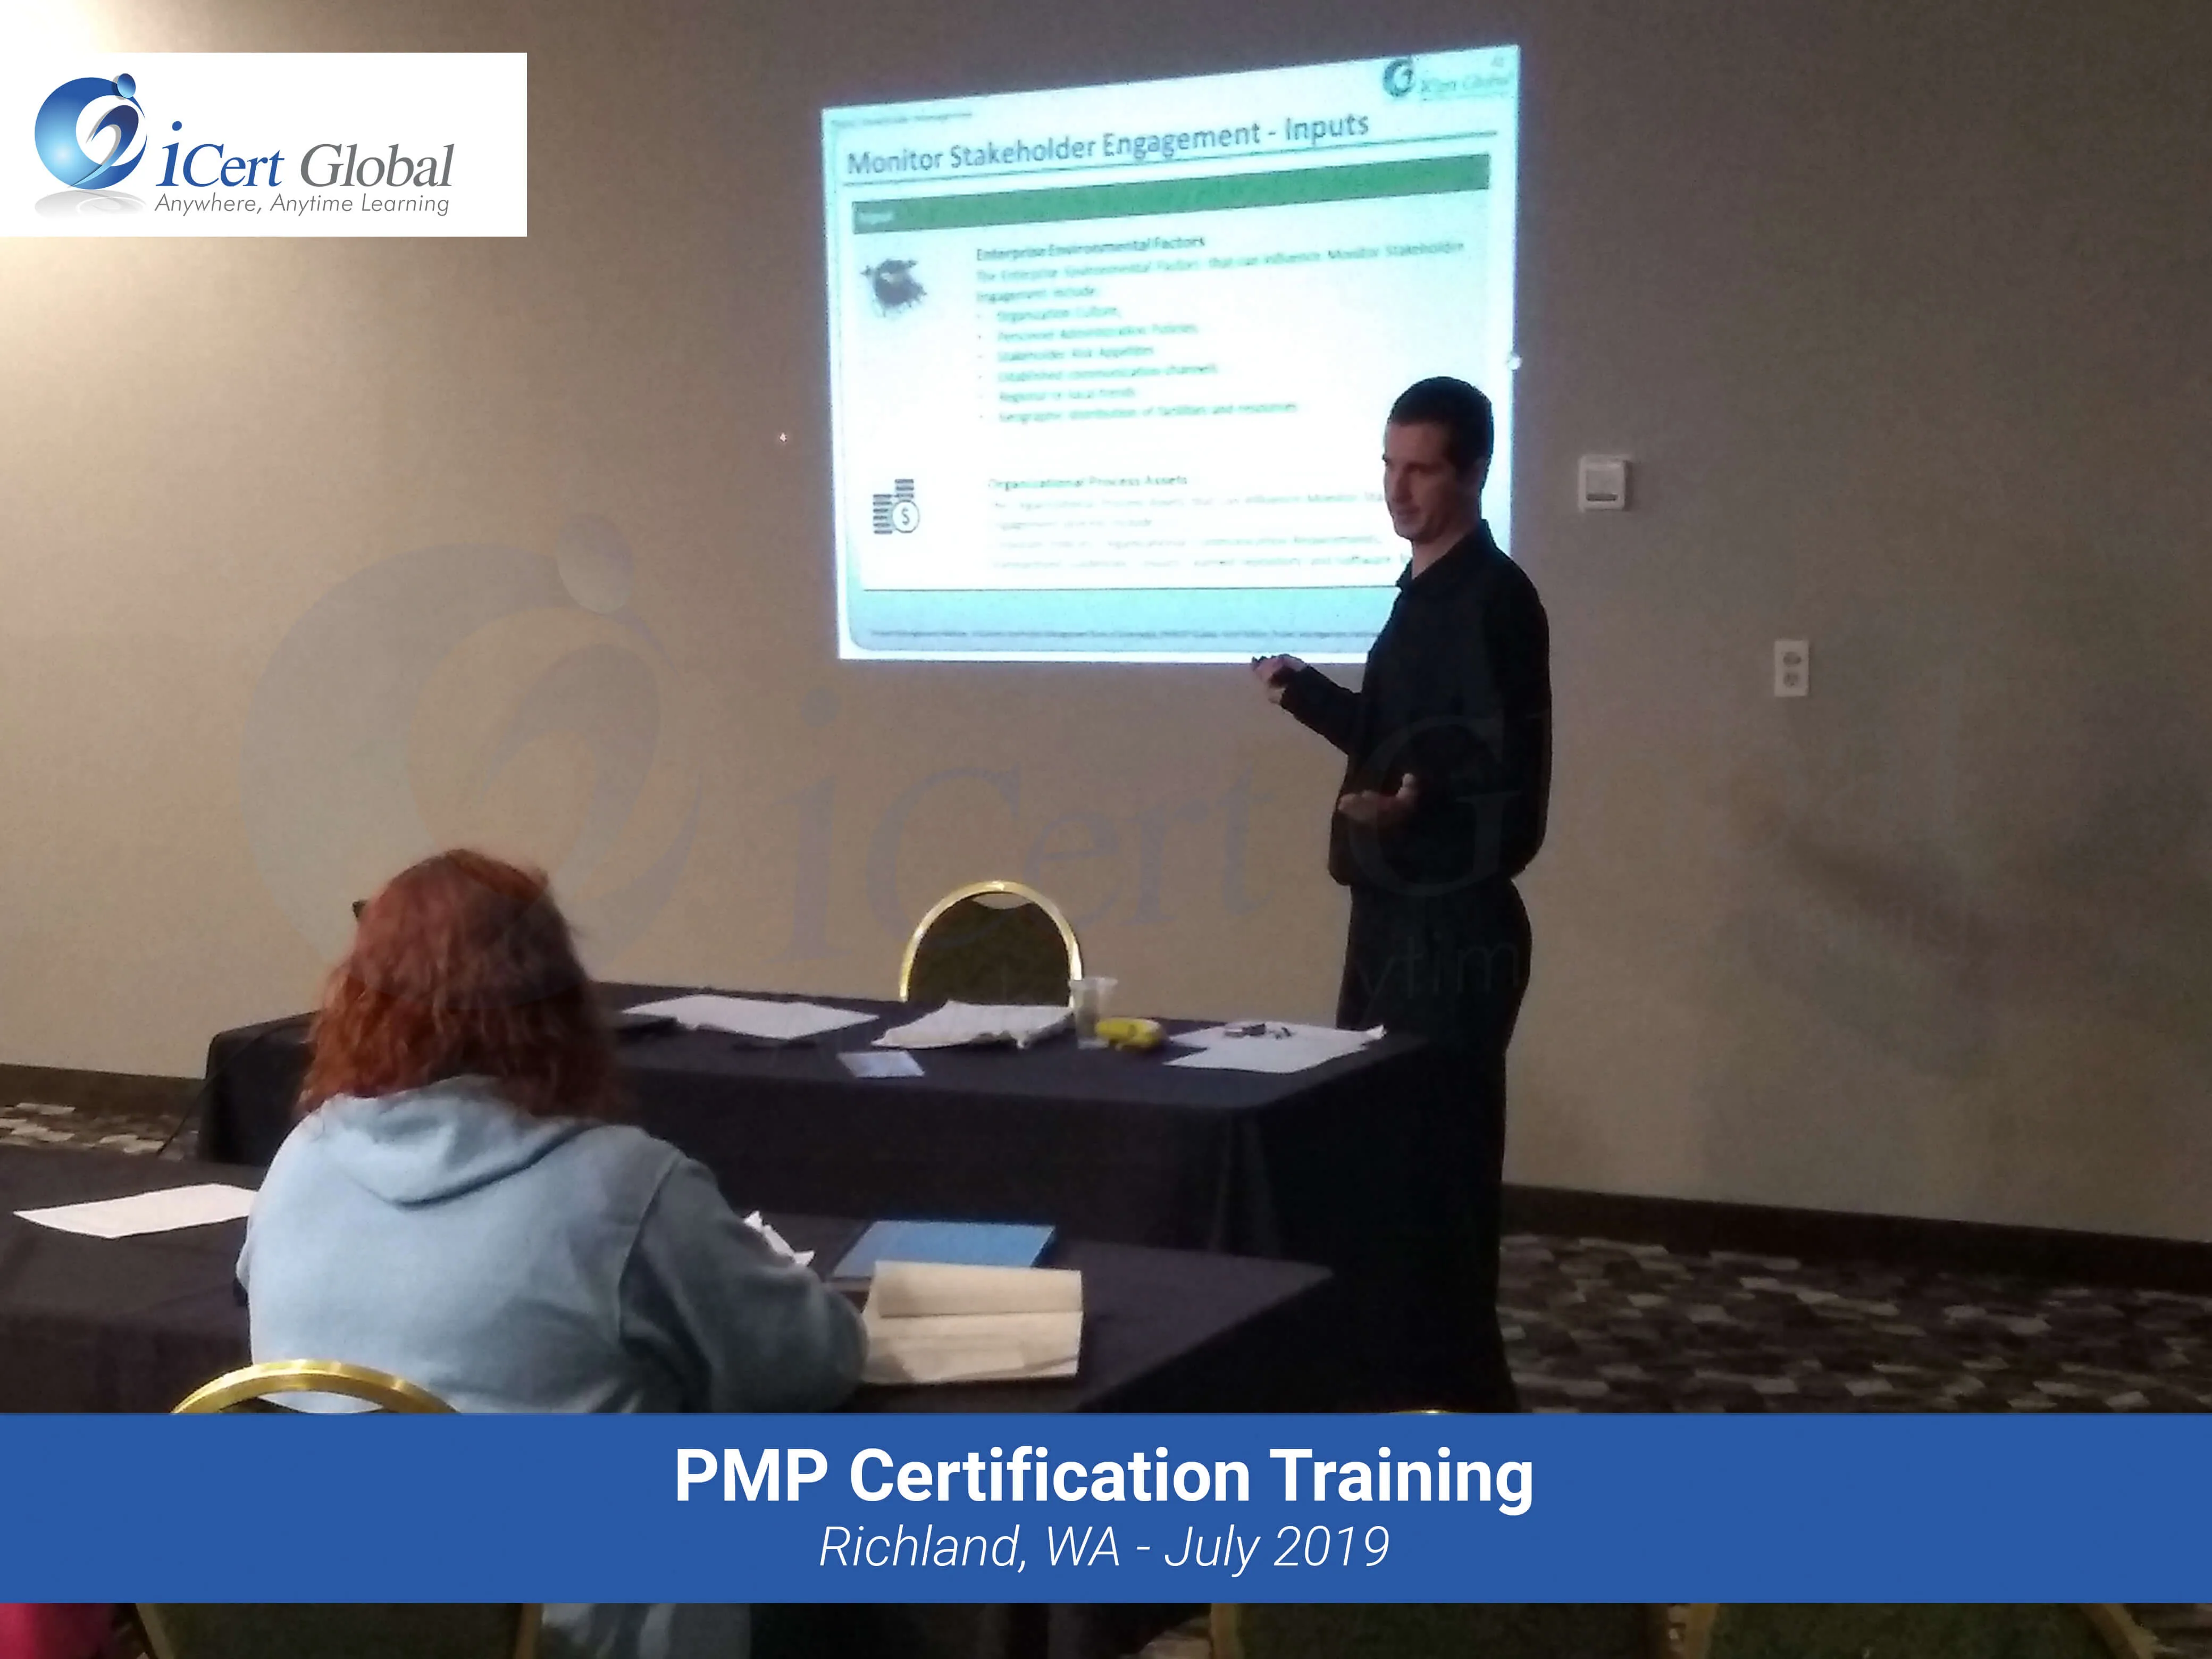 PMP Certification Exam Prep Training Course in Richland, WA in July 2019 